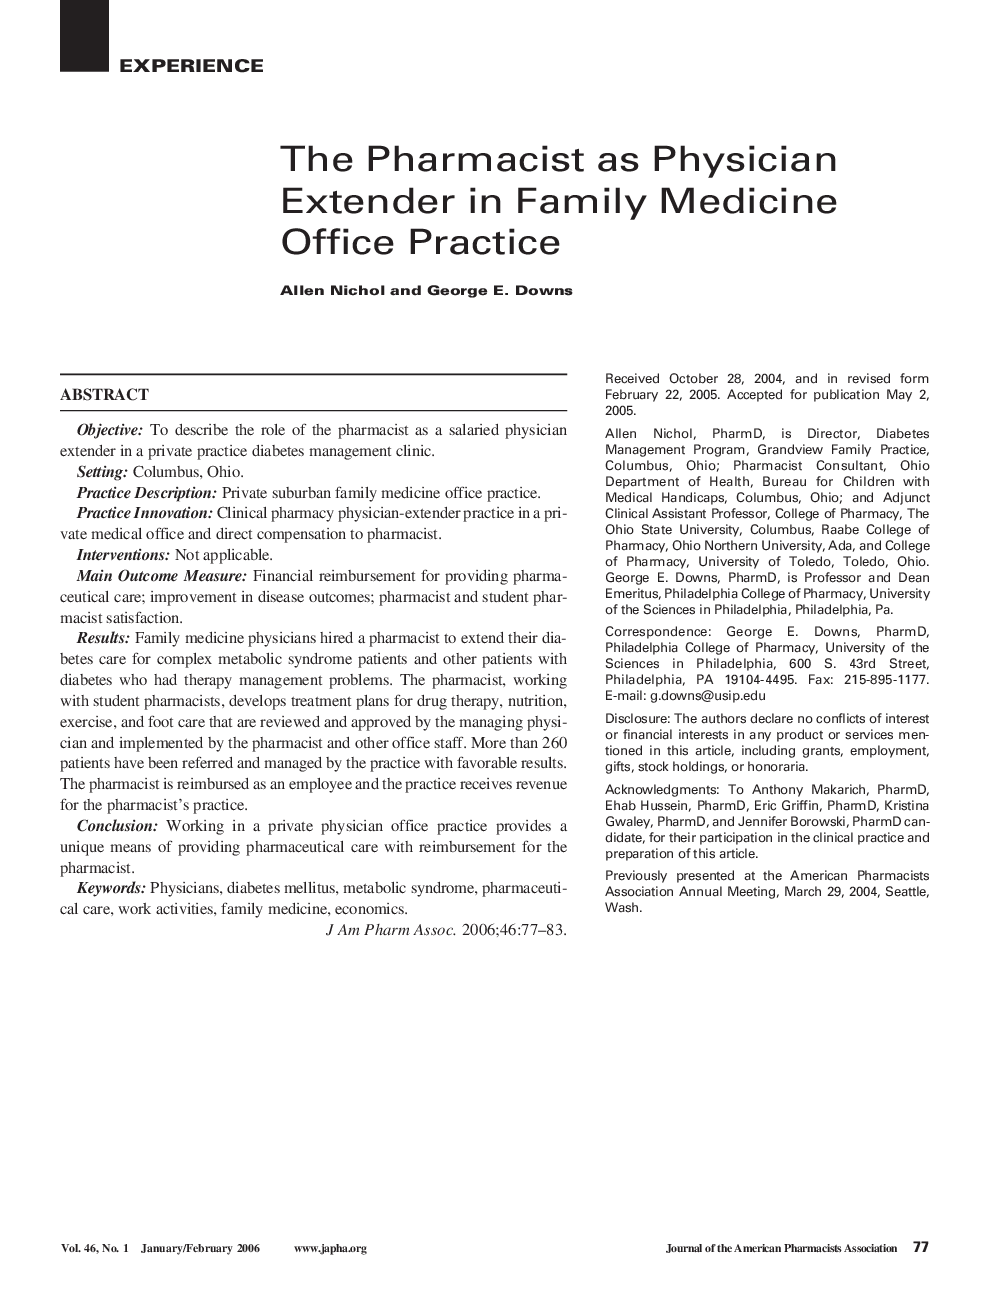 The Pharmacist as Physician Extender in Family Medicine Office Practice